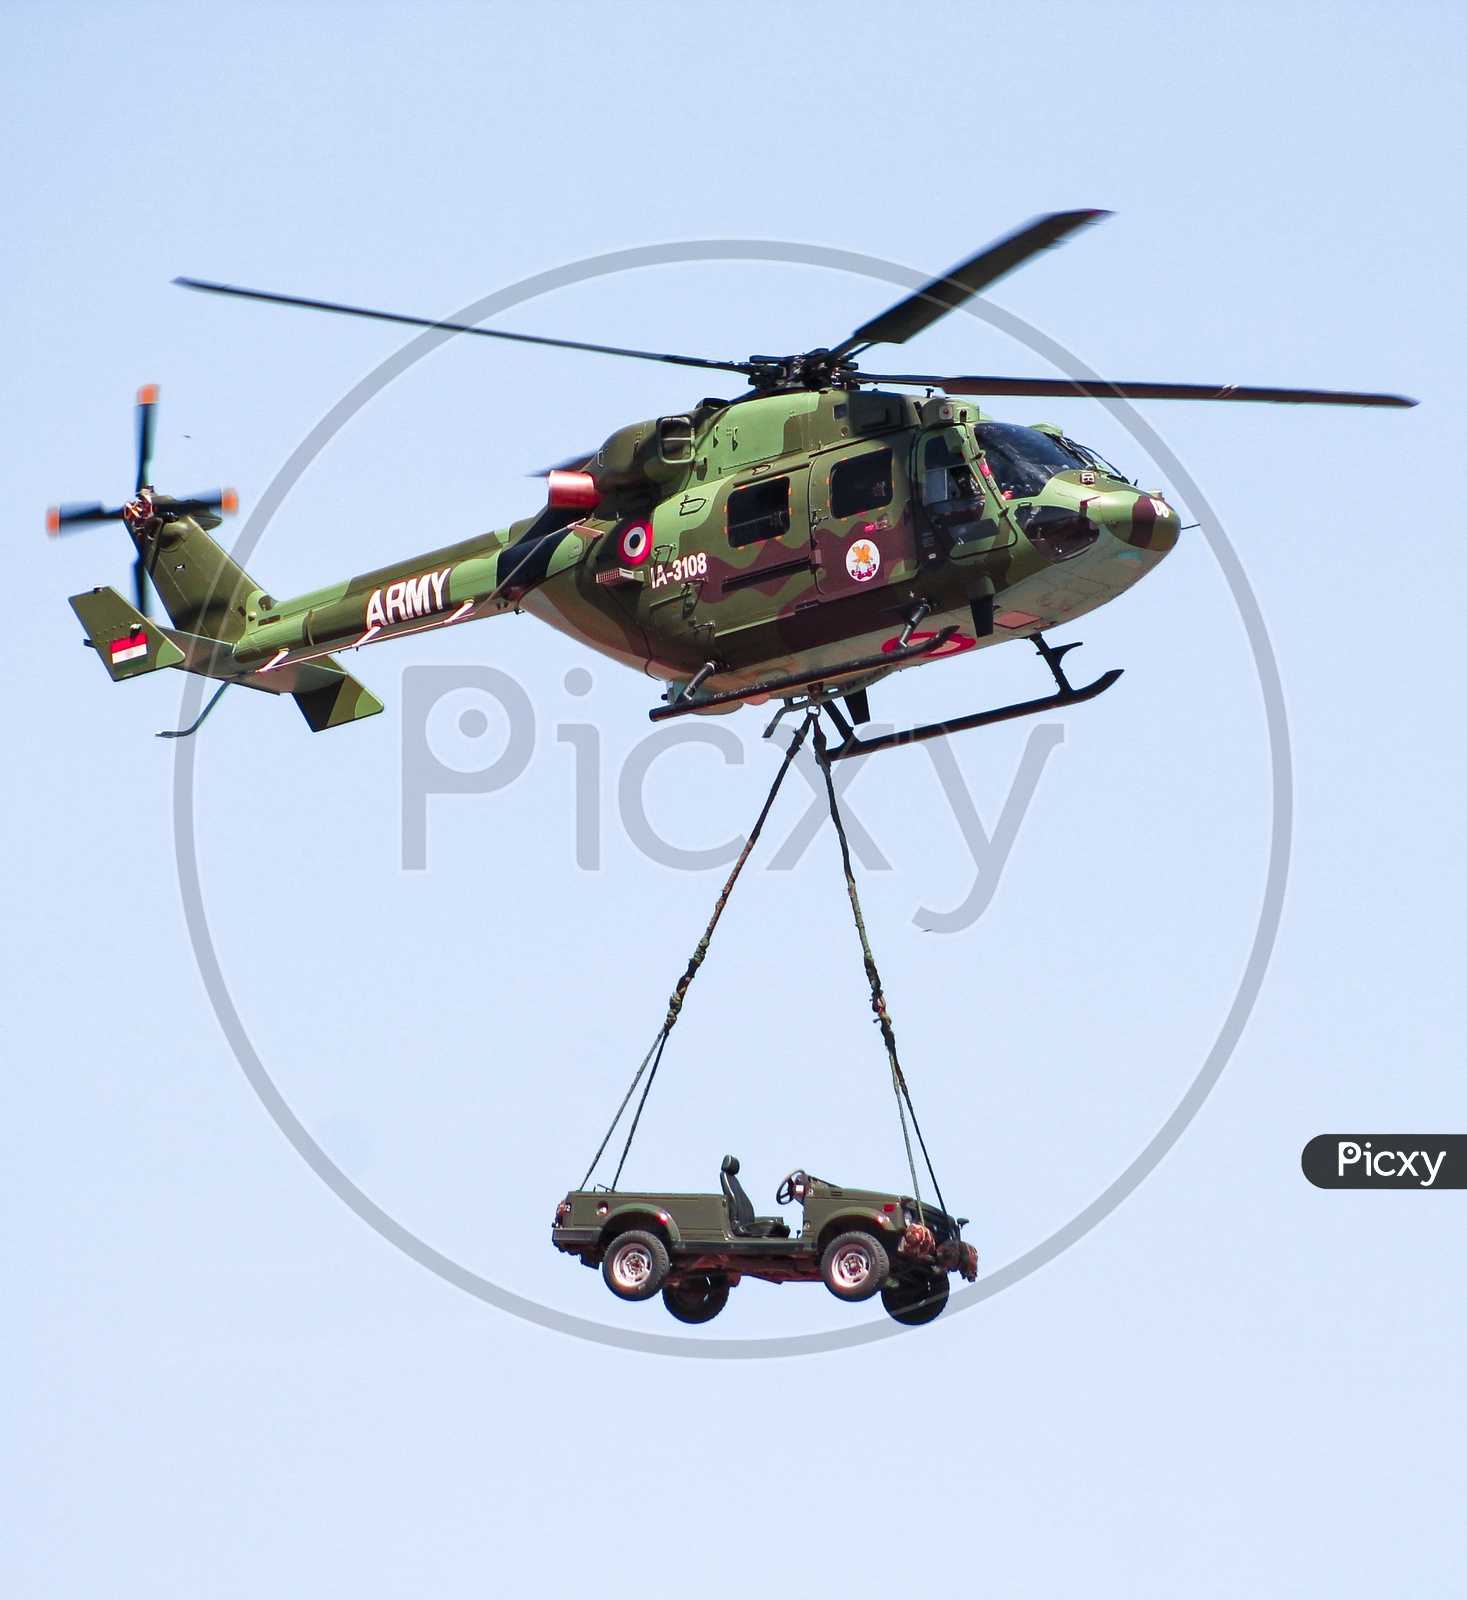 Dhruv Helicopter with Jeep